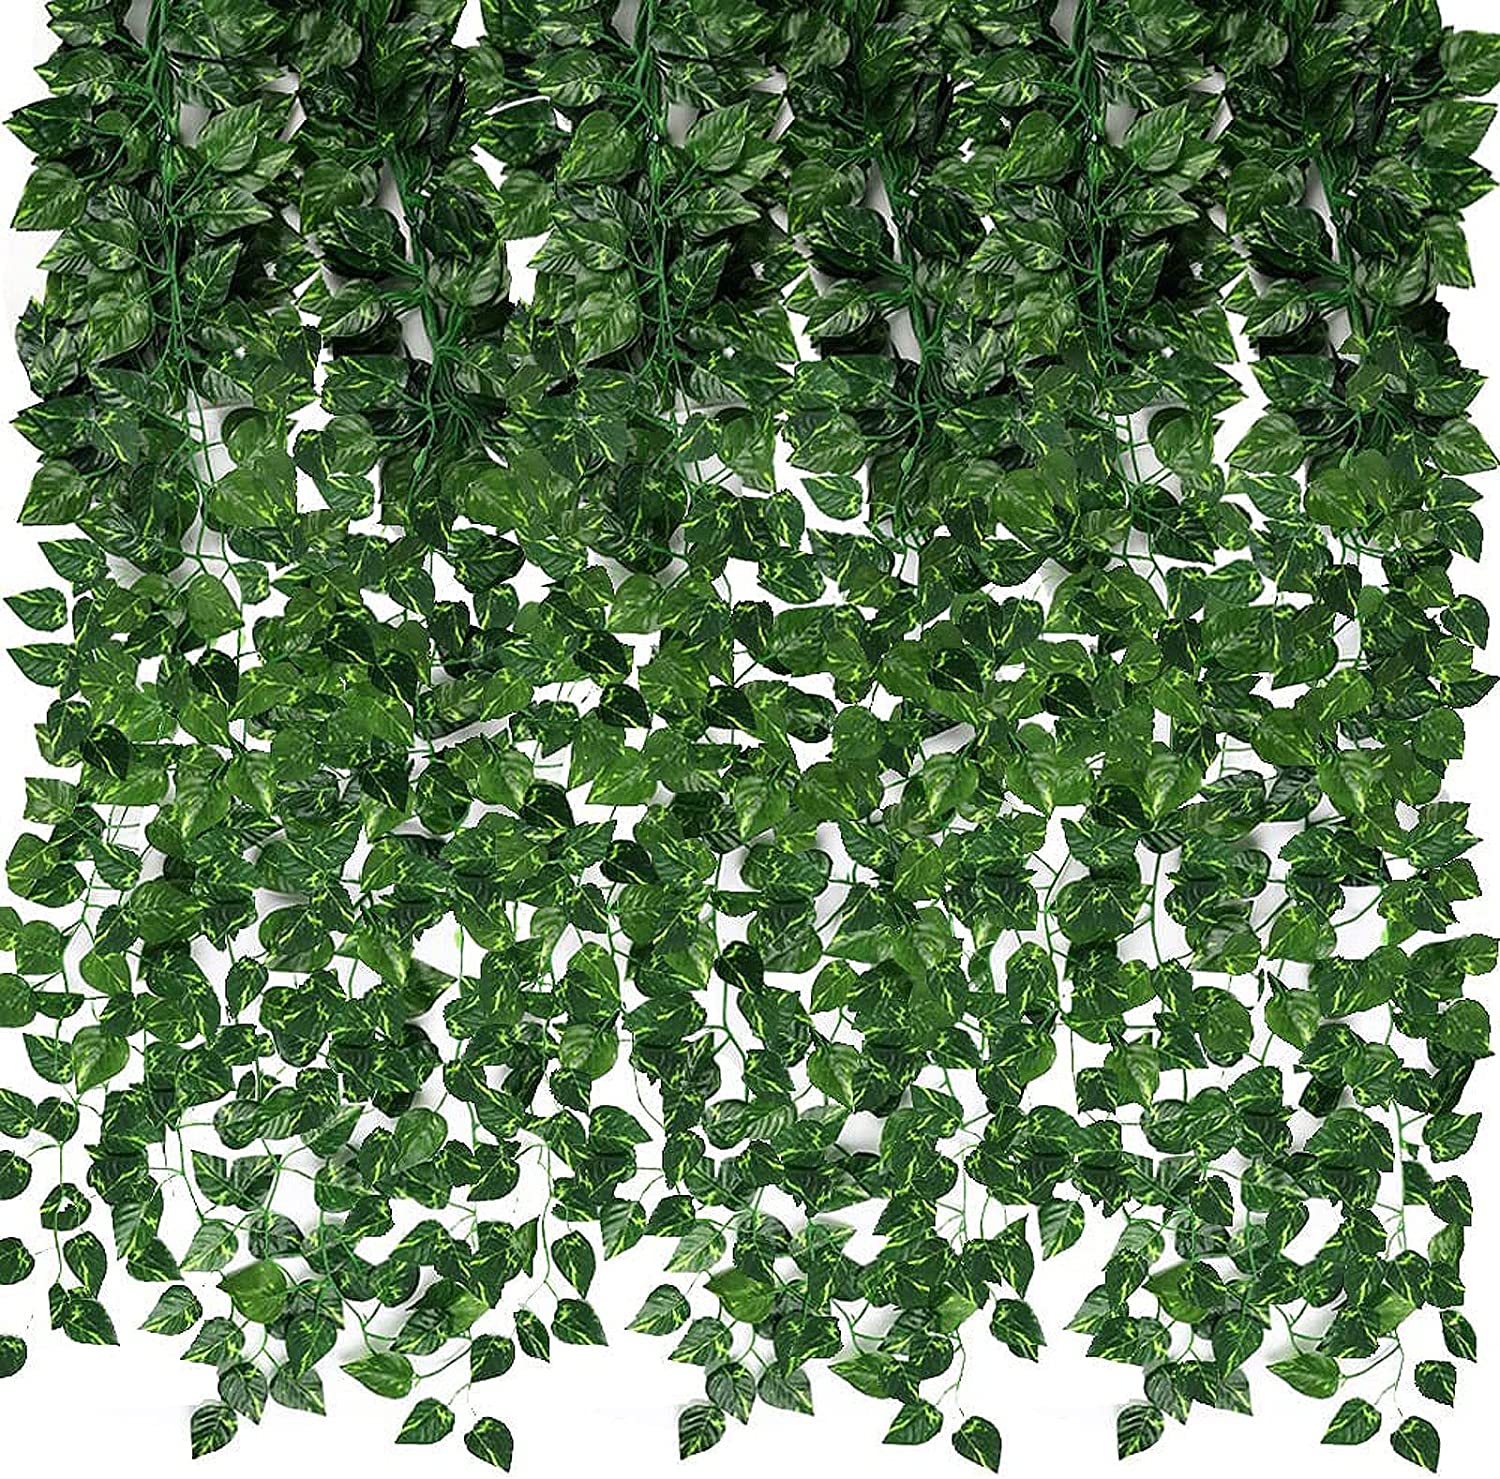 Coolmade 24 Pack 173ft Artificial Ivy Greenery Garland, Fake Vines Hanging Plants Backdrop for Room Bedroom Wall Decor, Green Leaves for Jungle Theme Party Wedding Decoration - image 1 of 6